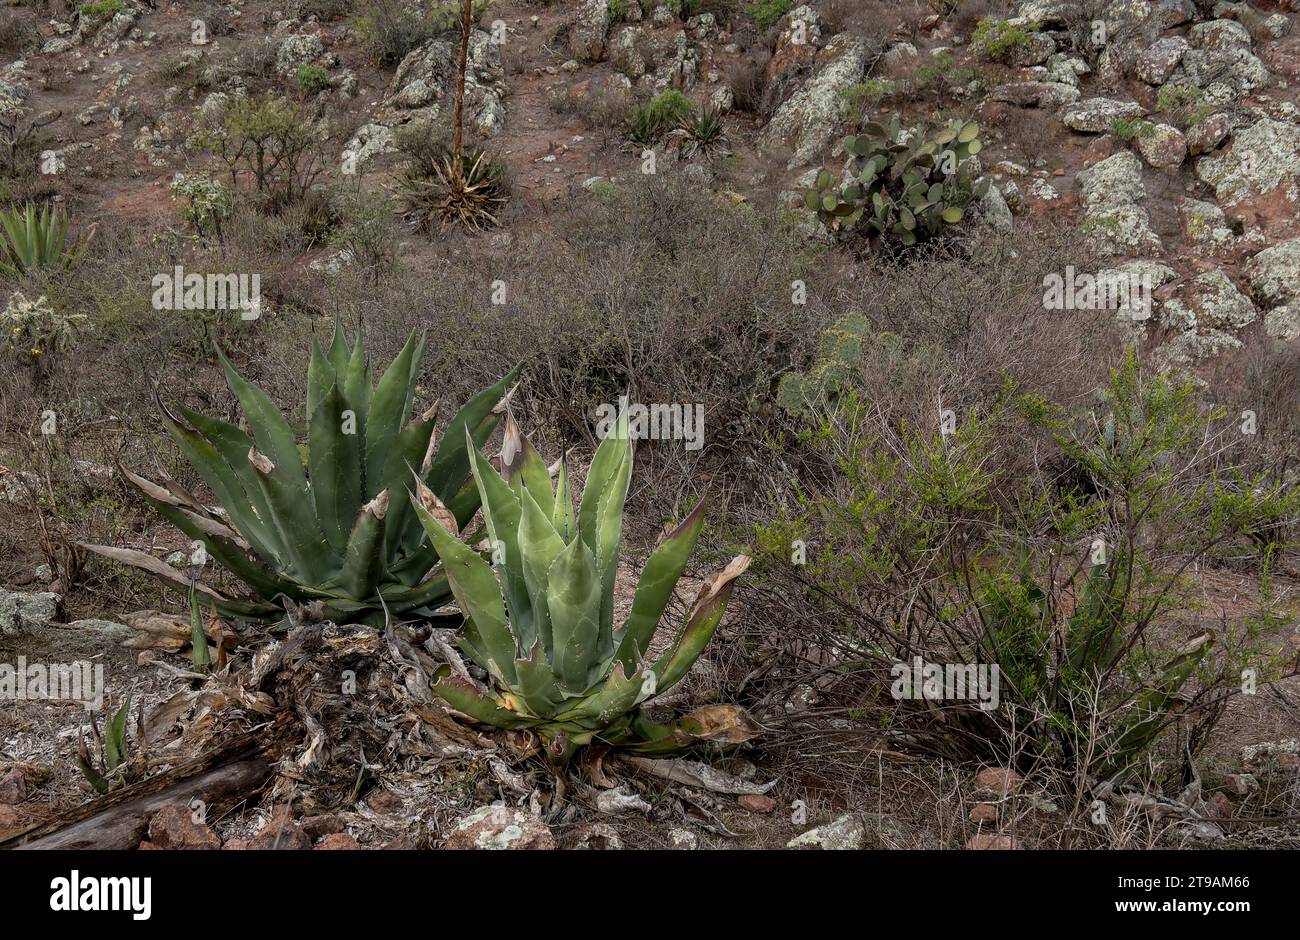 A Mexican landscape with Agave salmiana, rocks and bushes Stock Photo